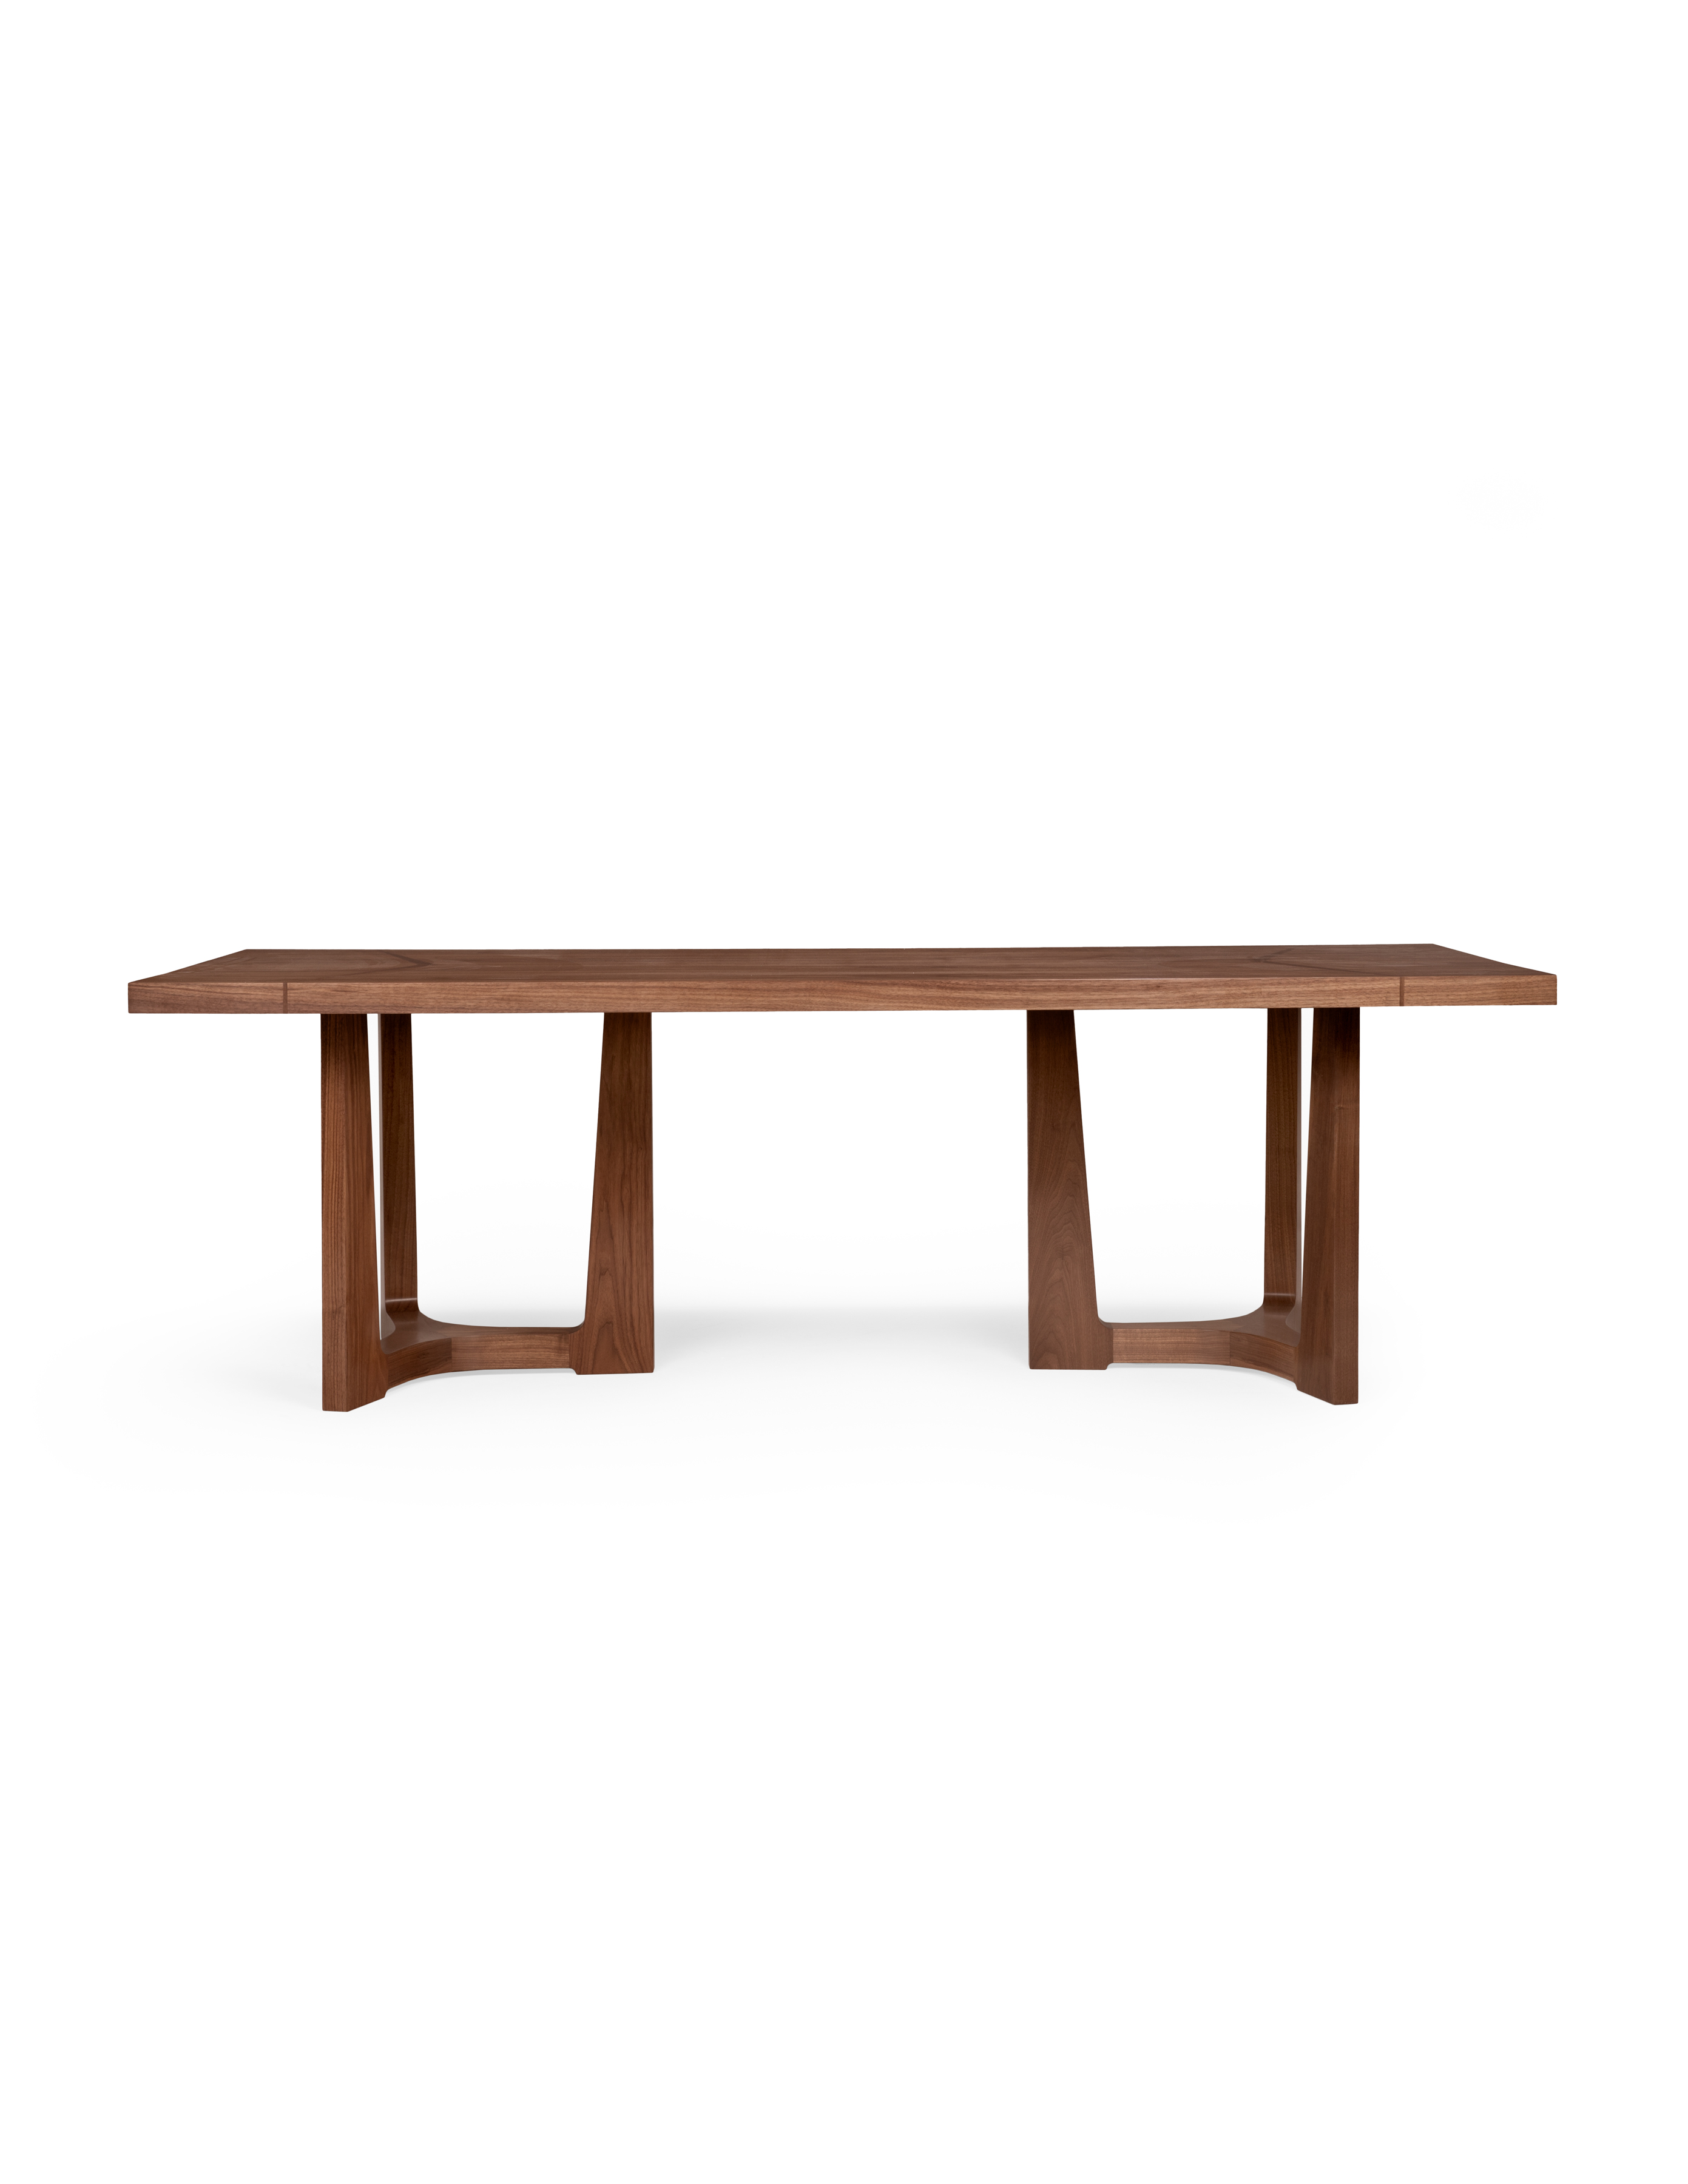 Trice Dining Table | HOLLY HUNT